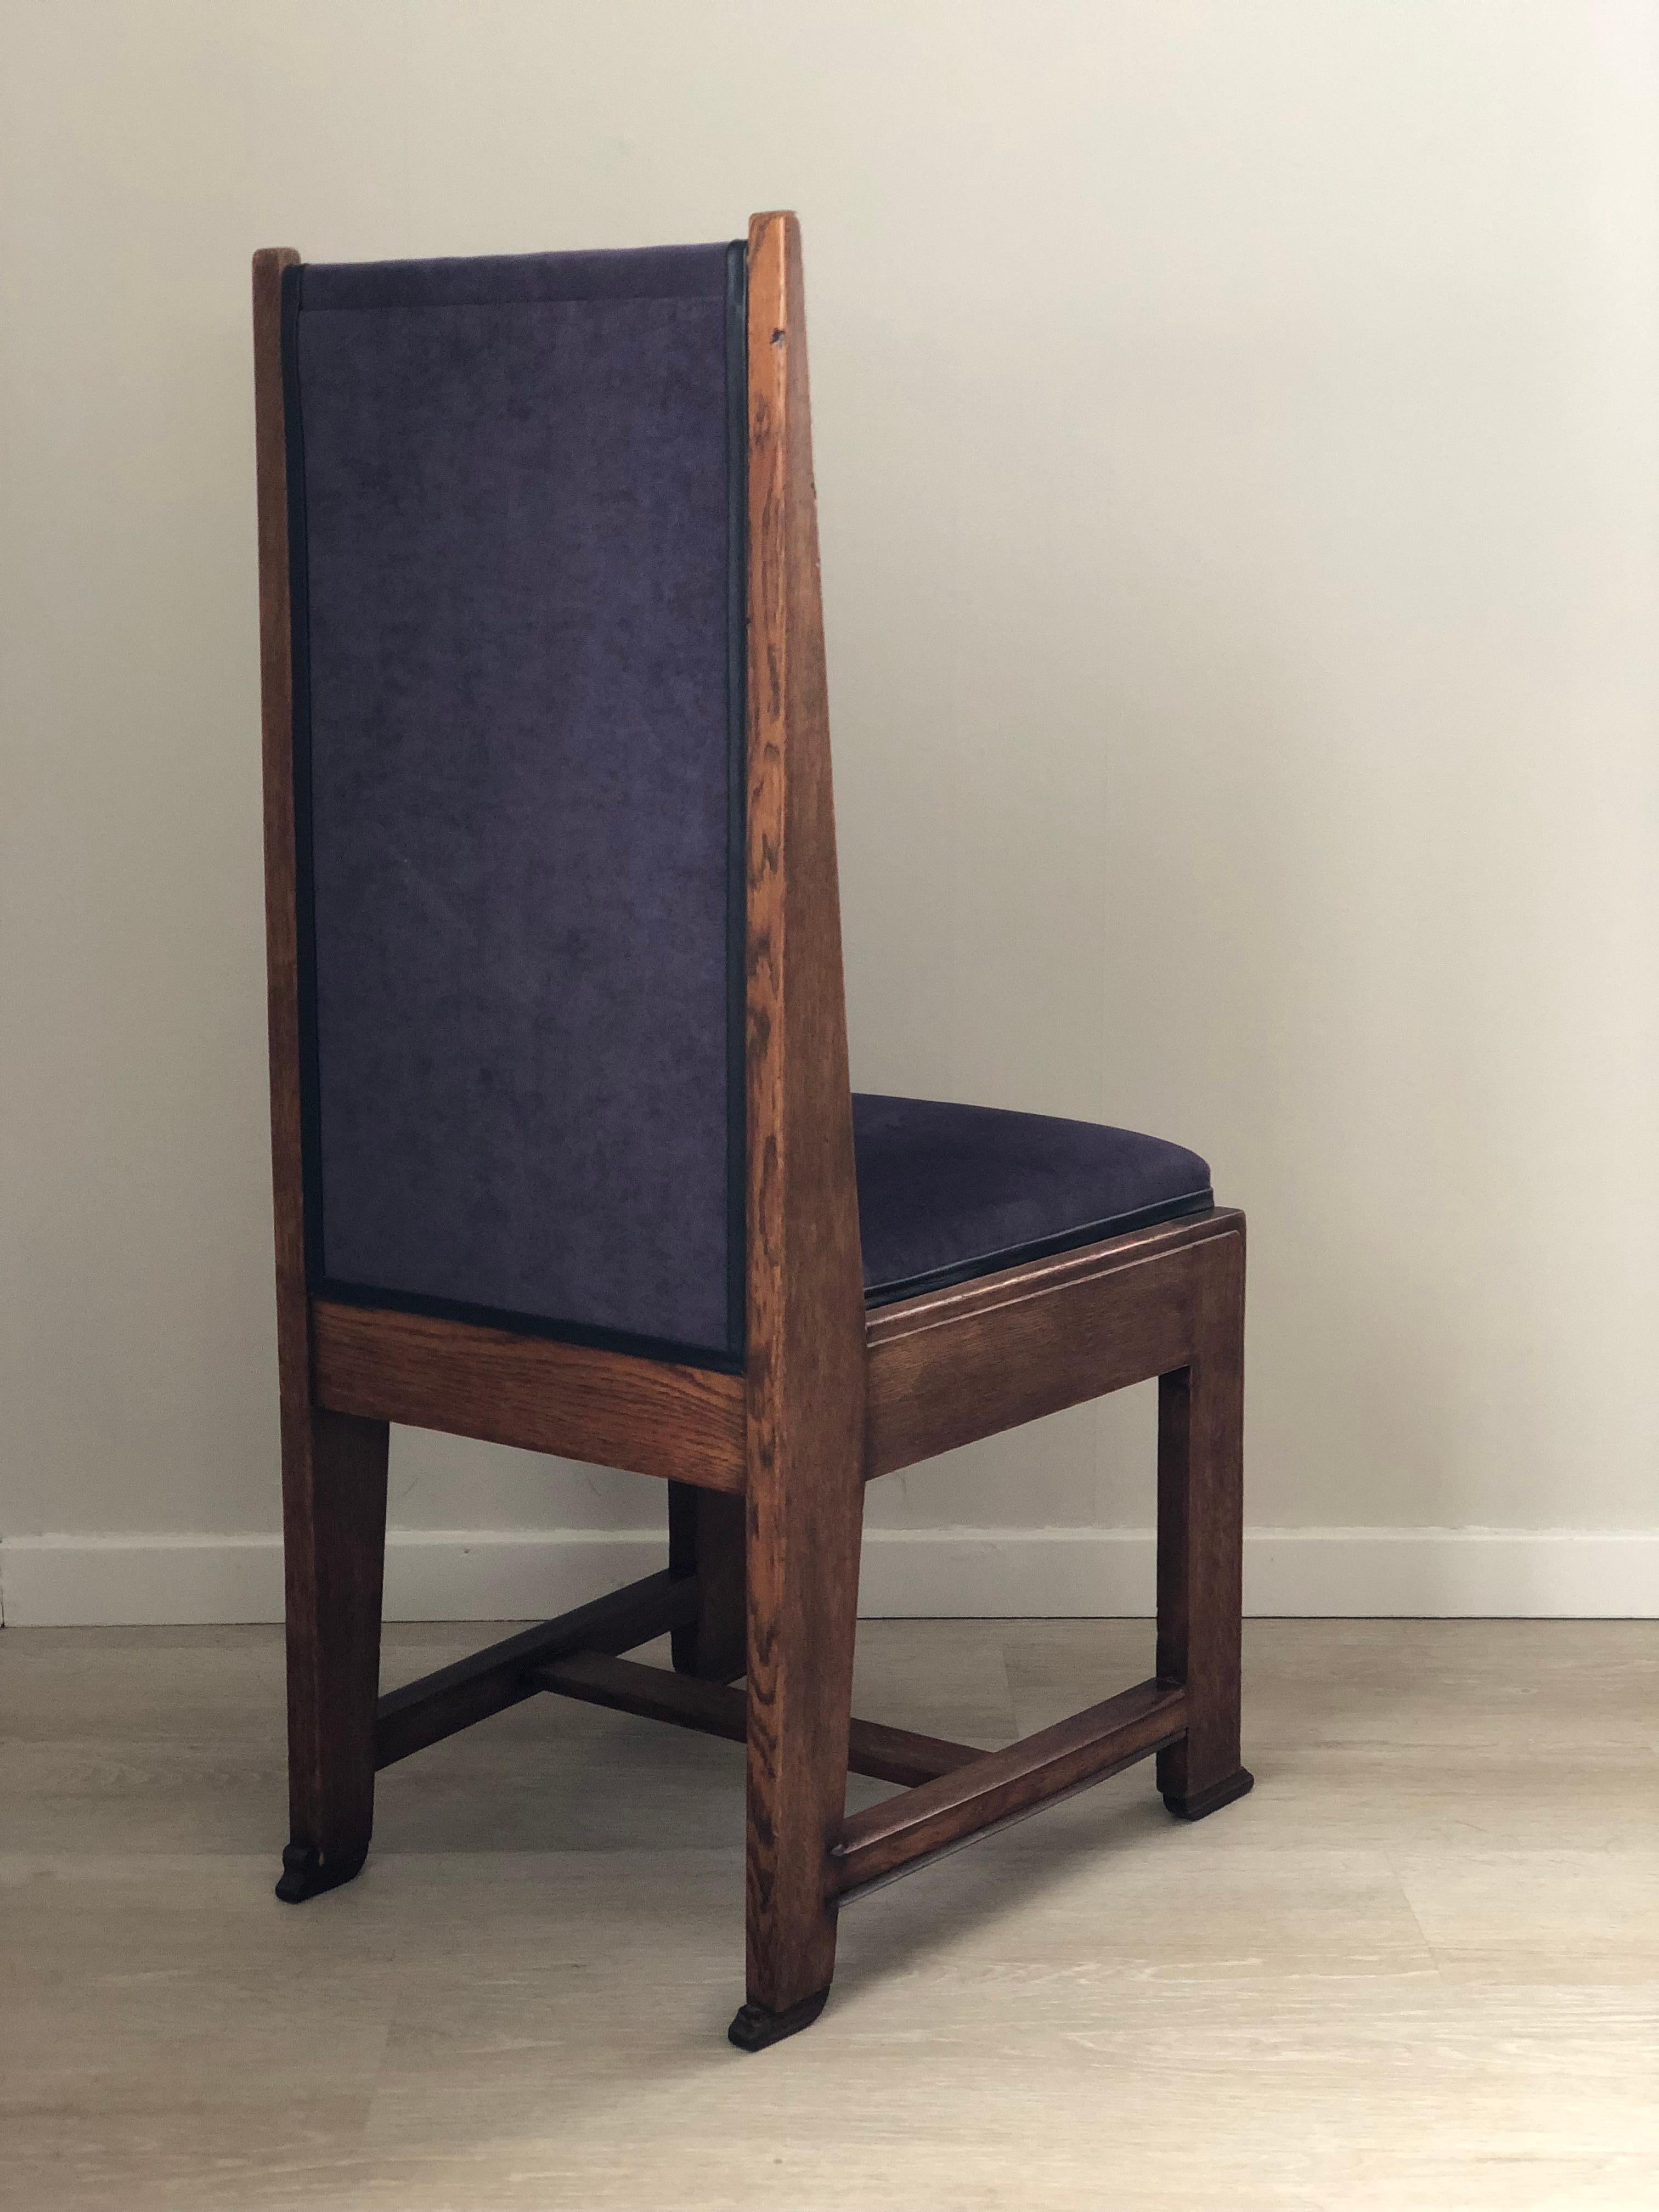 Dutch A Pair of 4 Art Deco Haagse School Dining Chair Frits Spanjaard 1930s For Sale